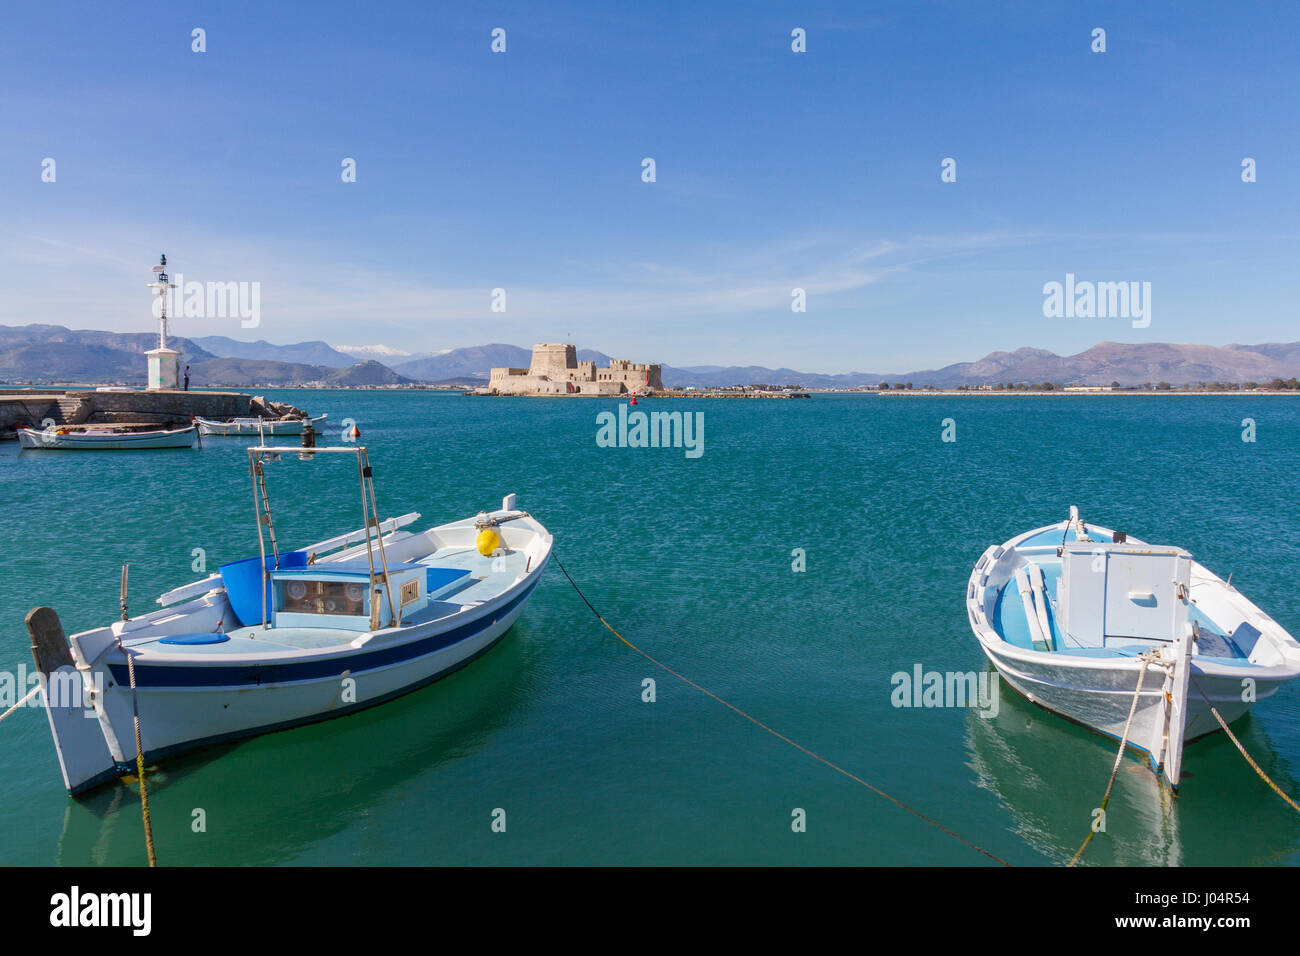 Traditional Wooden Fishing Boats, Lightouse and Bourtzi Fortress in the background in Nafplion, Greece Stock Photo